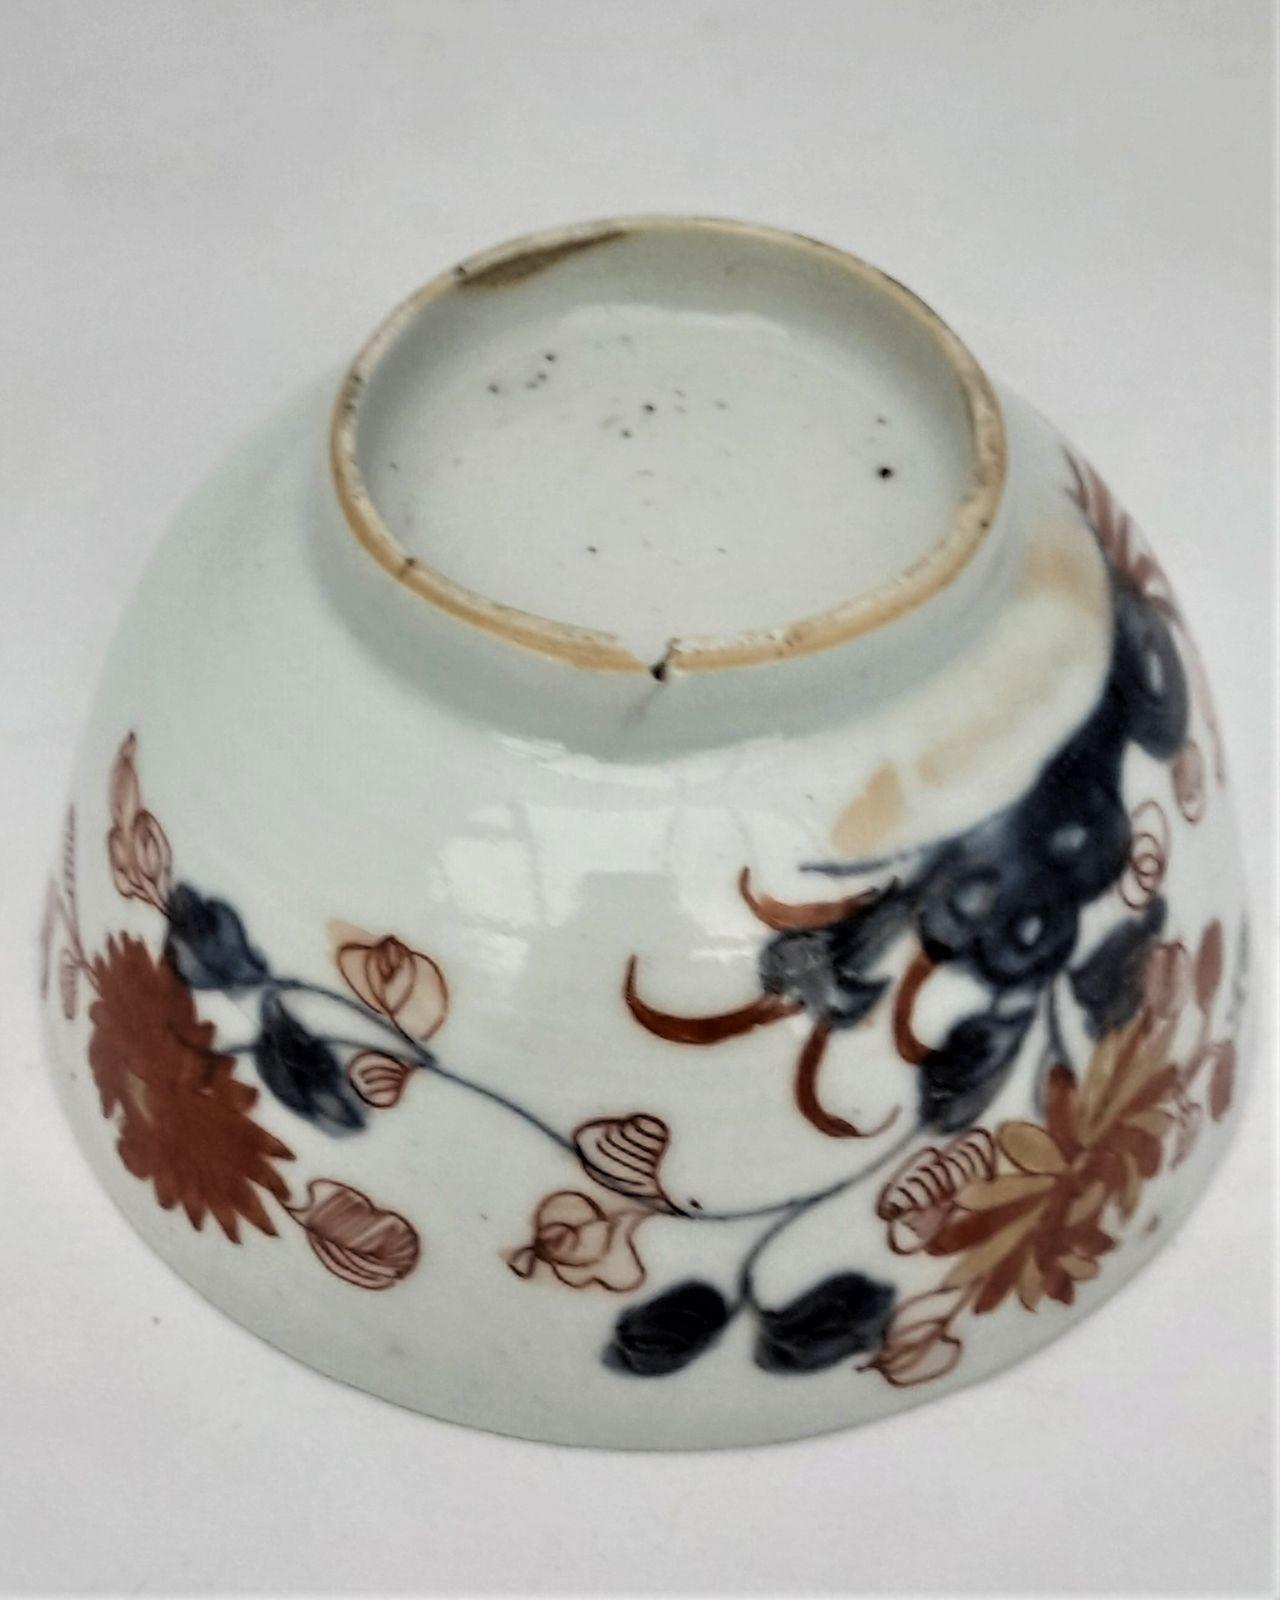 Chinese Porcelain Imari Pattern Bowl Rock and Peony Made During the reign of Emperor Qianlong 乾隆 Qing Dynasty 清代 Antique circa 1750 1 pint capacity rice bowl